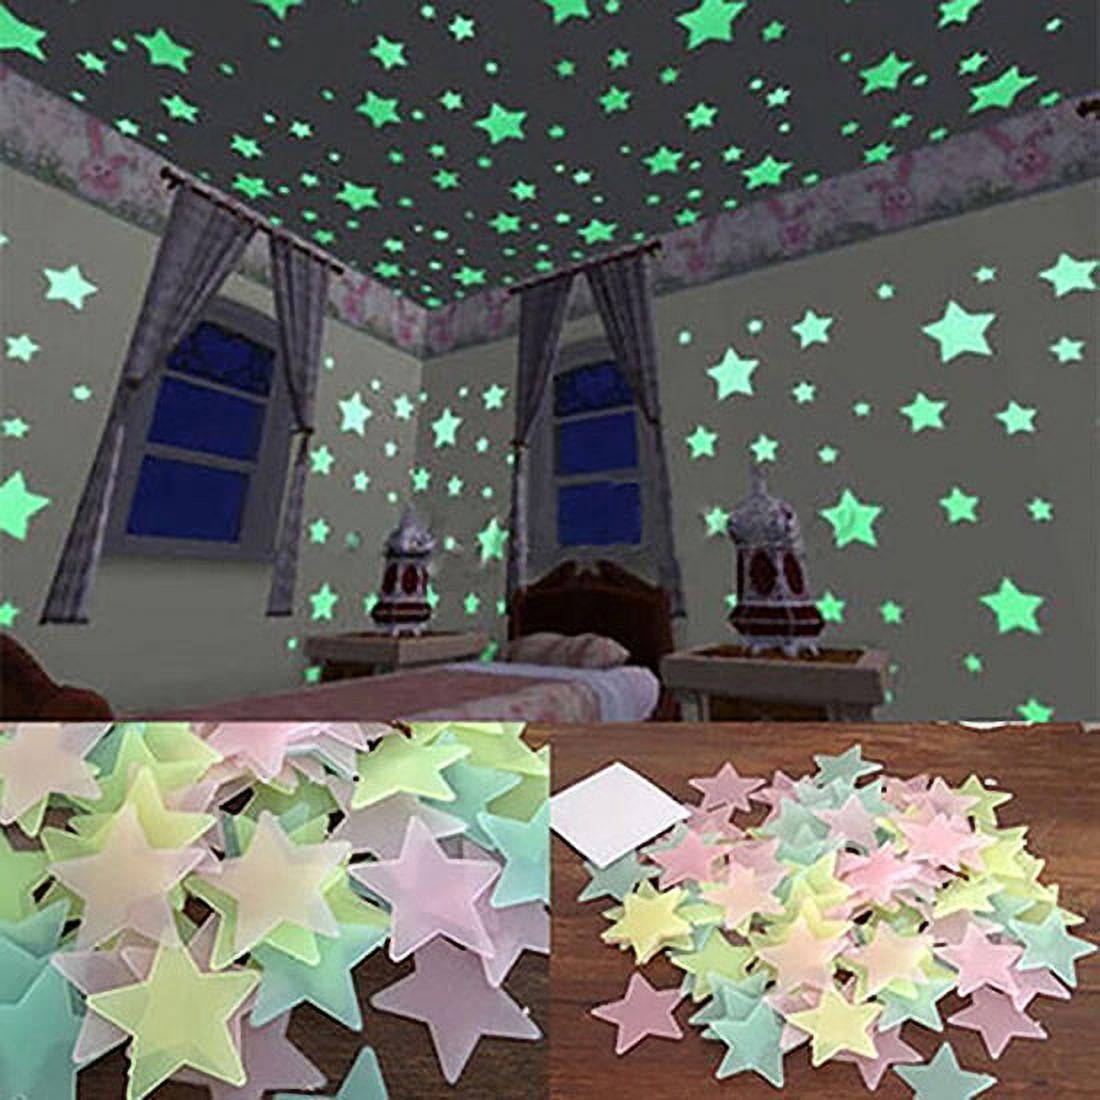 Four Color 100PCS 3D Home Wall Ceiling Glow In The Dark Stars with Moon Stickers 